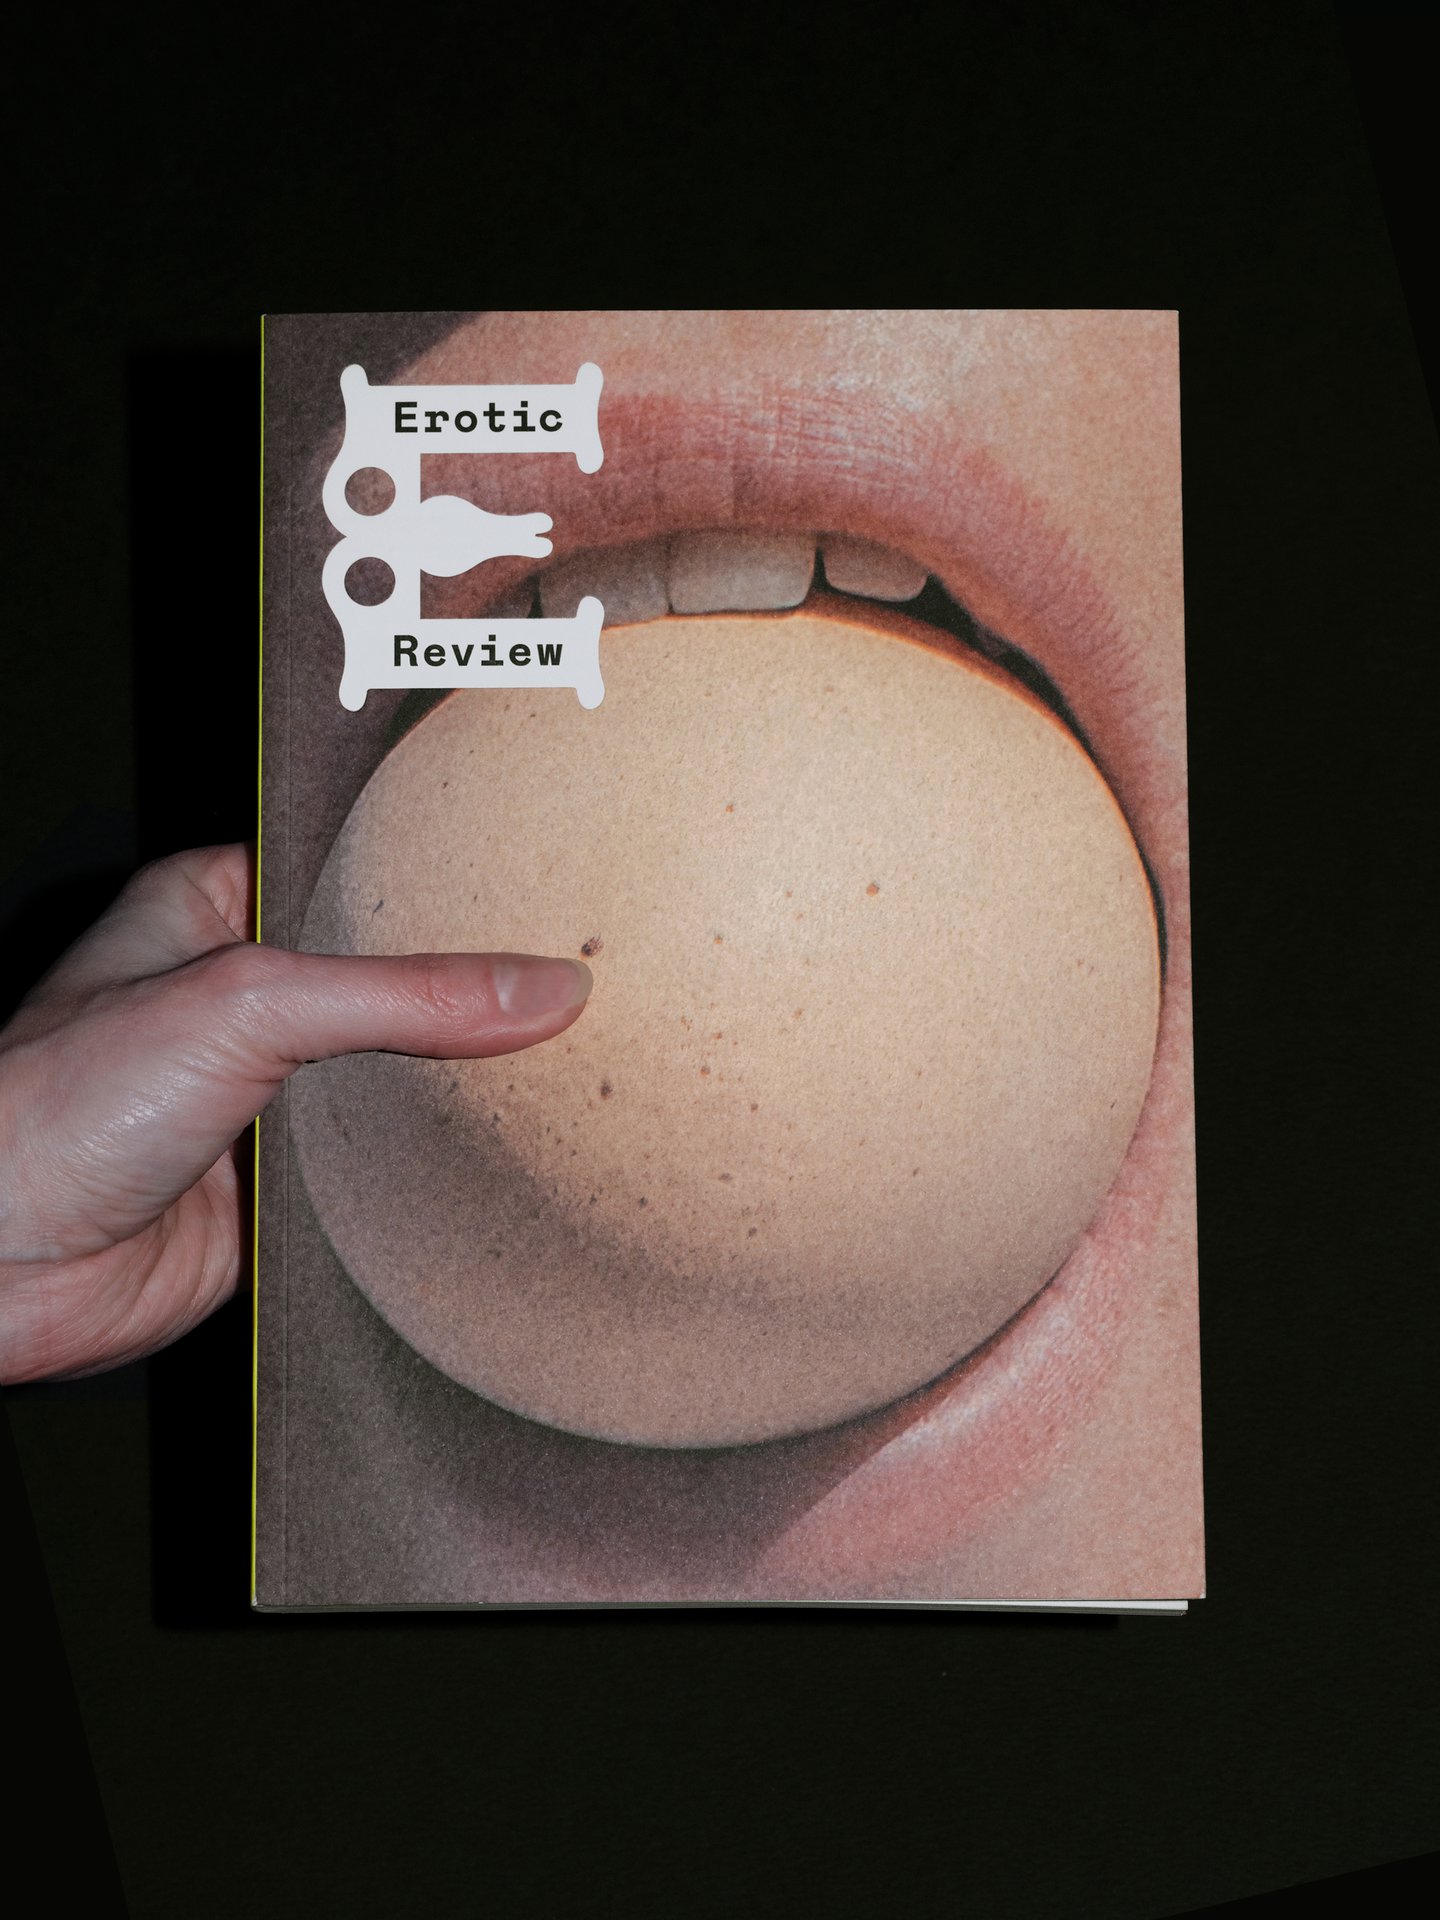 Studio Frith’s design system for Erotic Review imitates the body during arousal